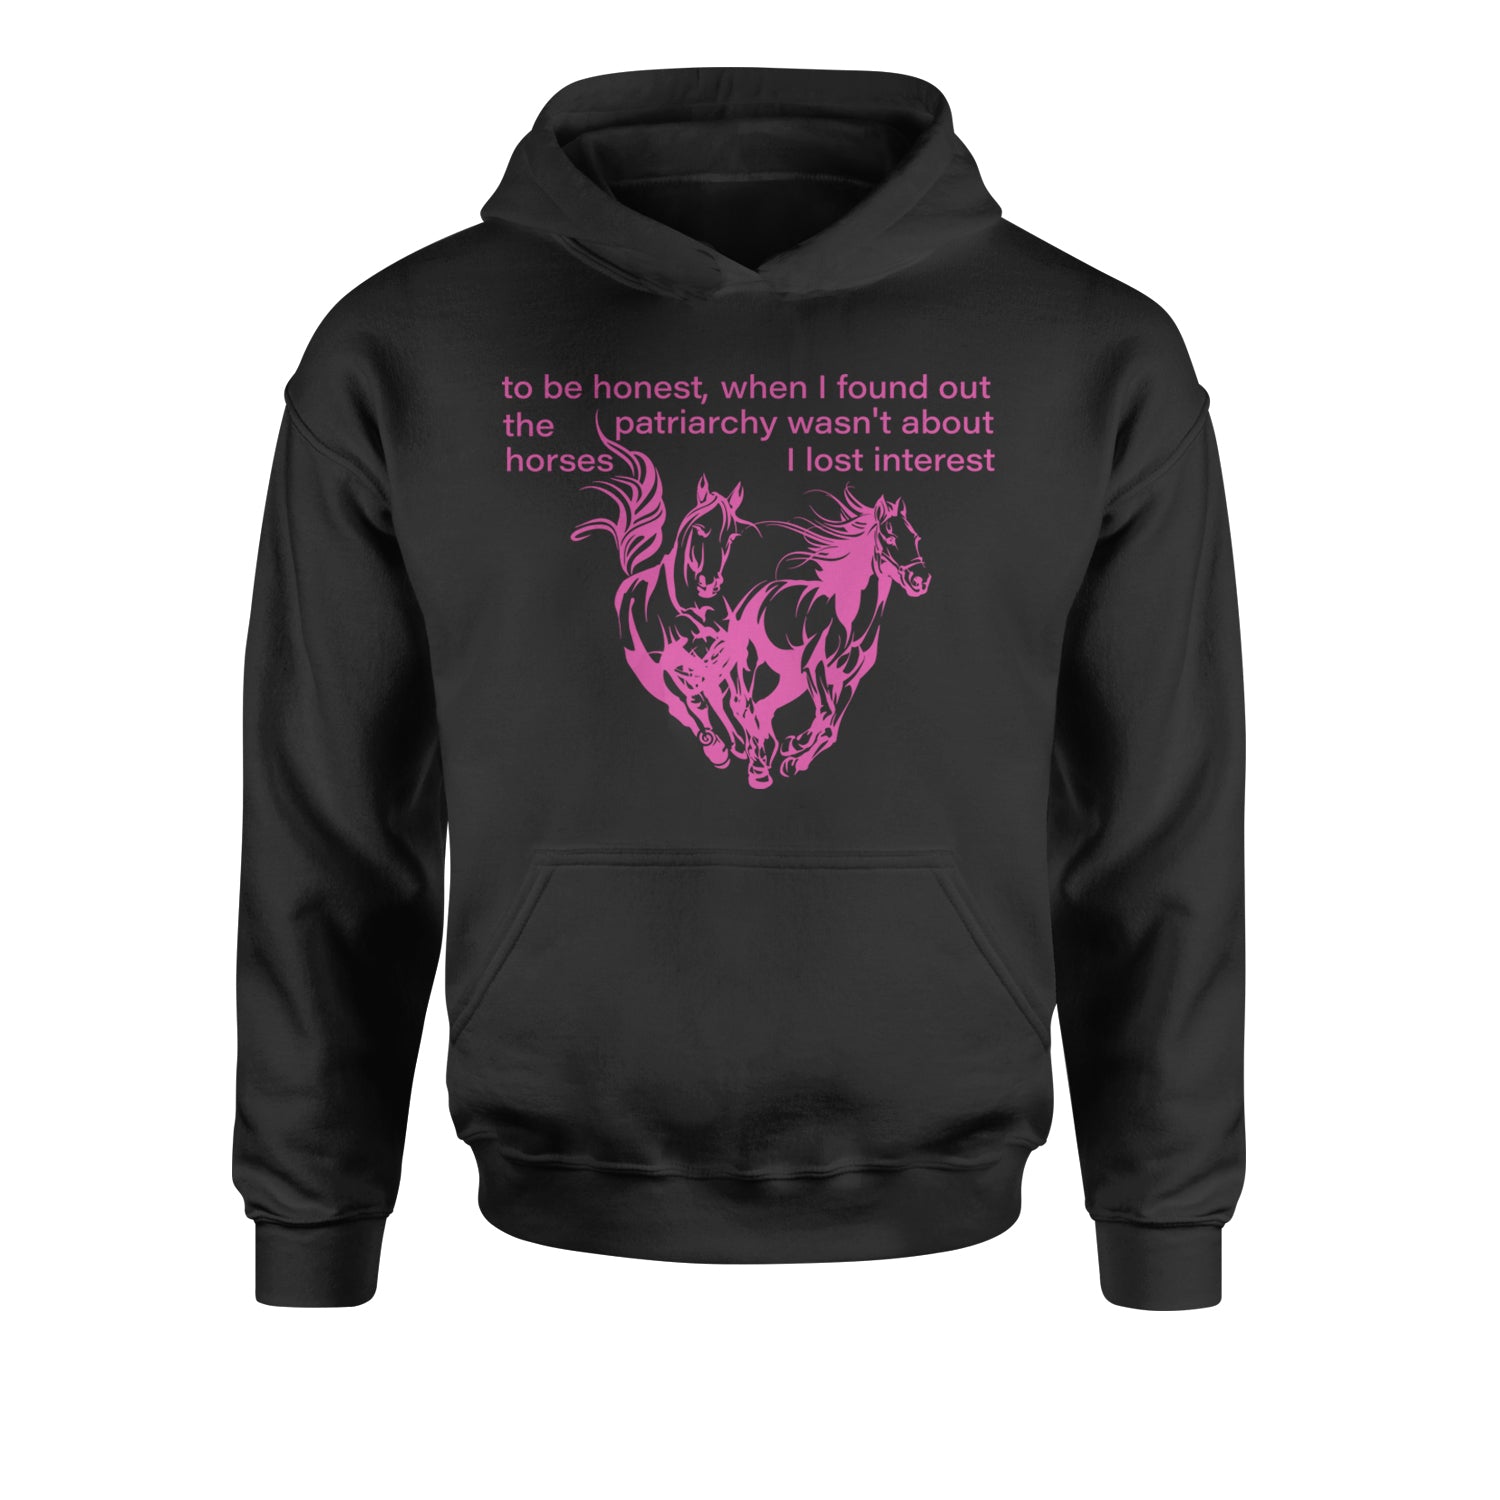 The Patriarchy Wasn't About Horses Barbenheimer Youth-Sized Hoodie